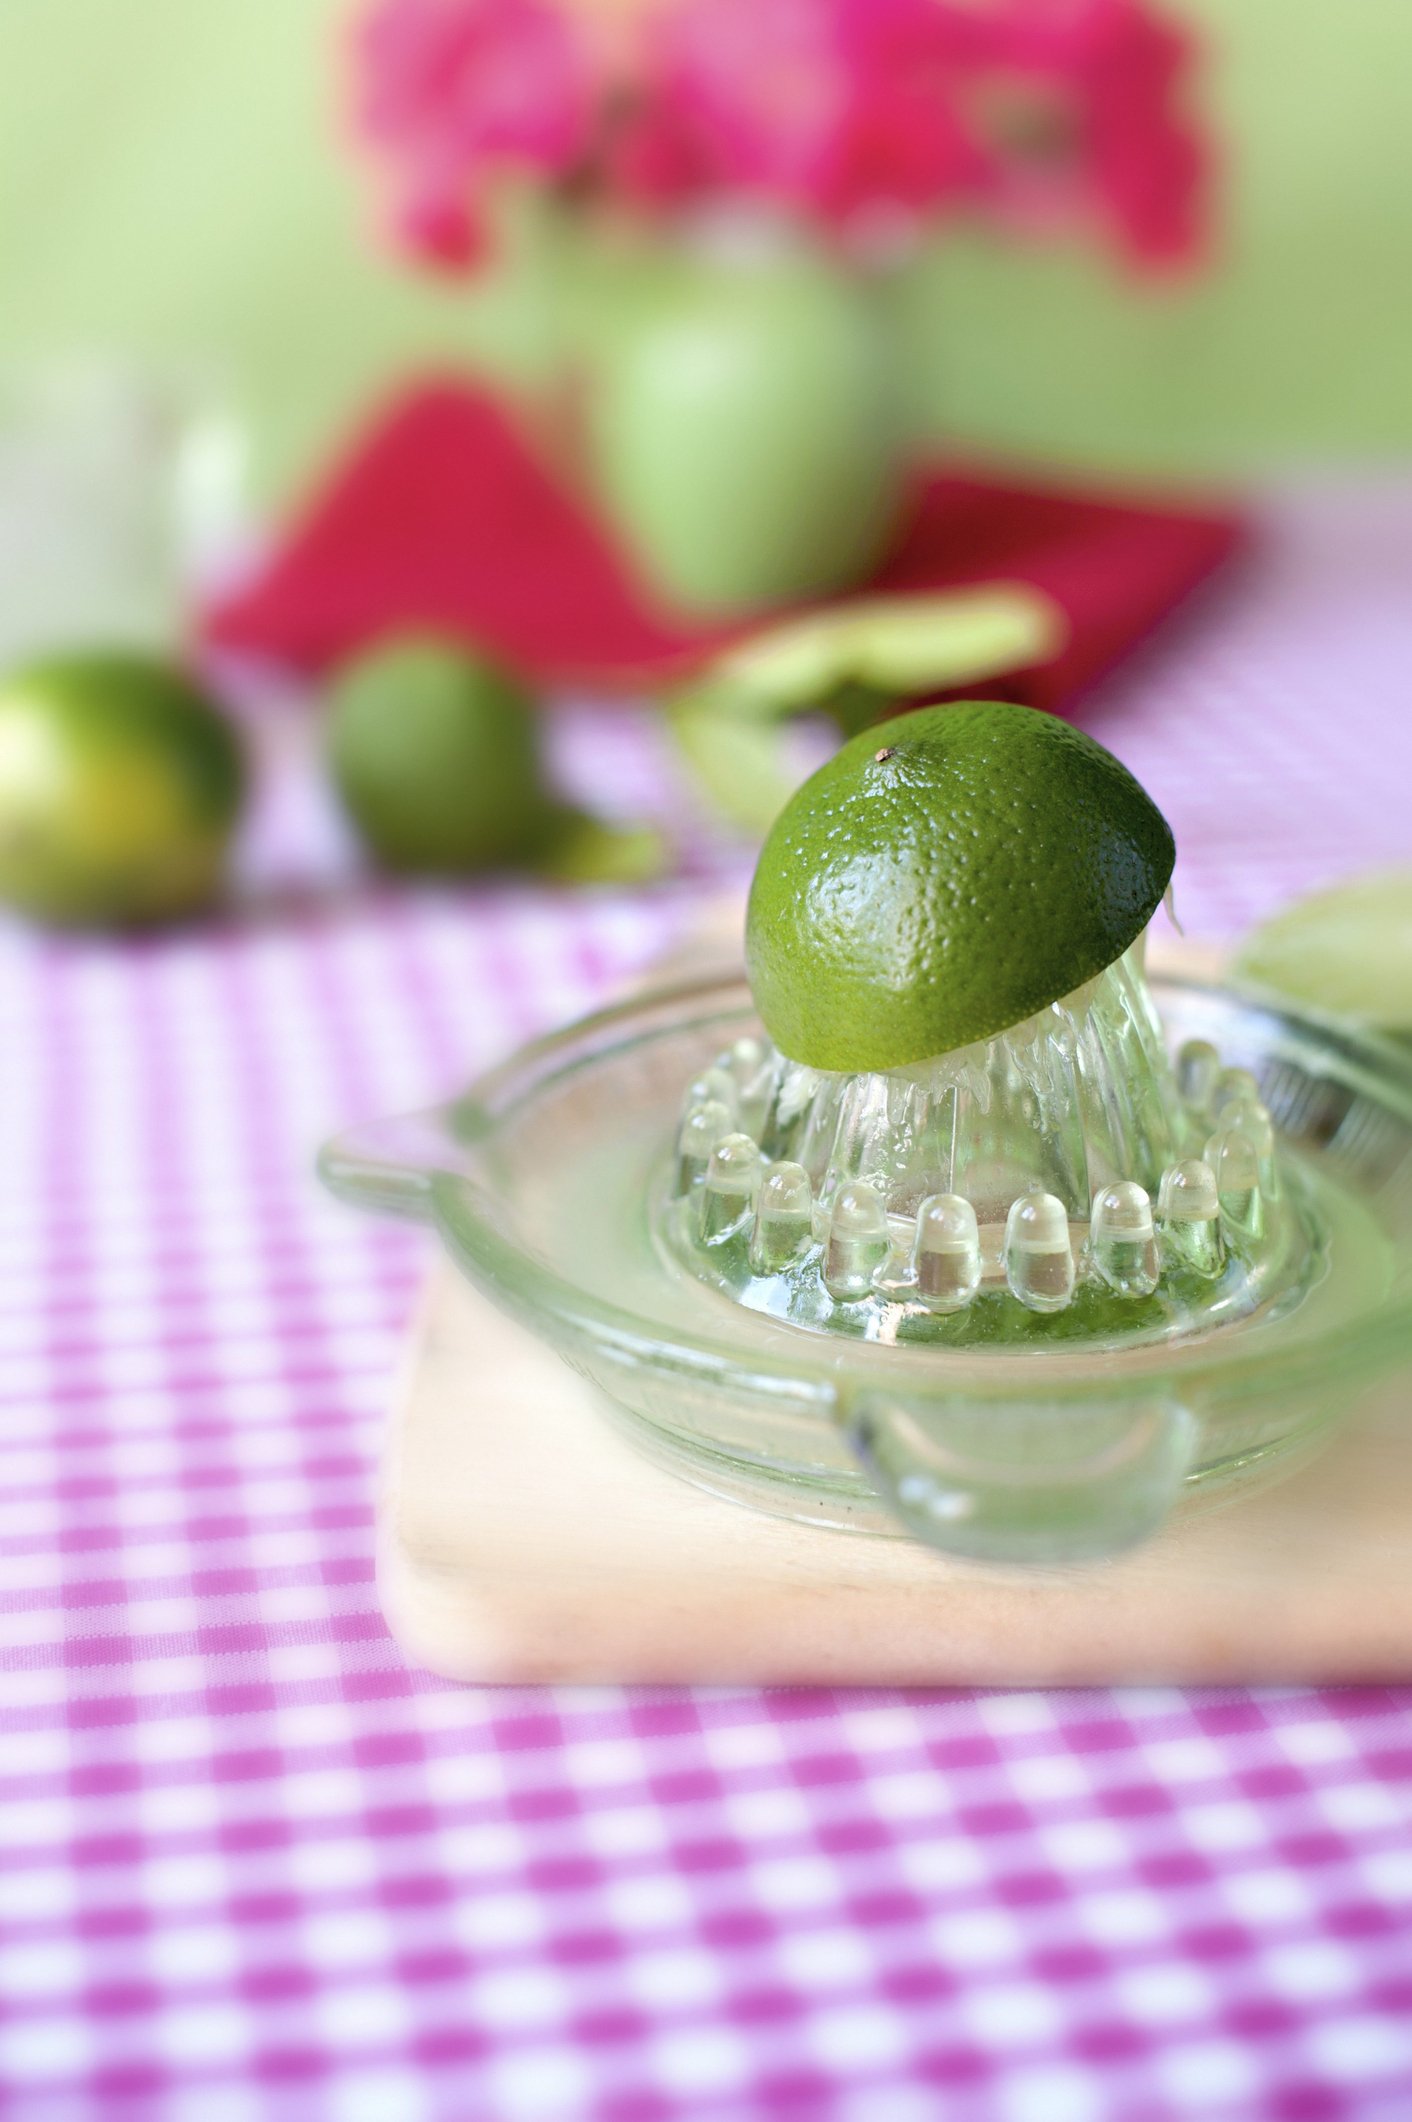 Fresh limes on a red and white gingham cloth being hand juiced in a vintage green glass juicer. | Photo: Getty Images